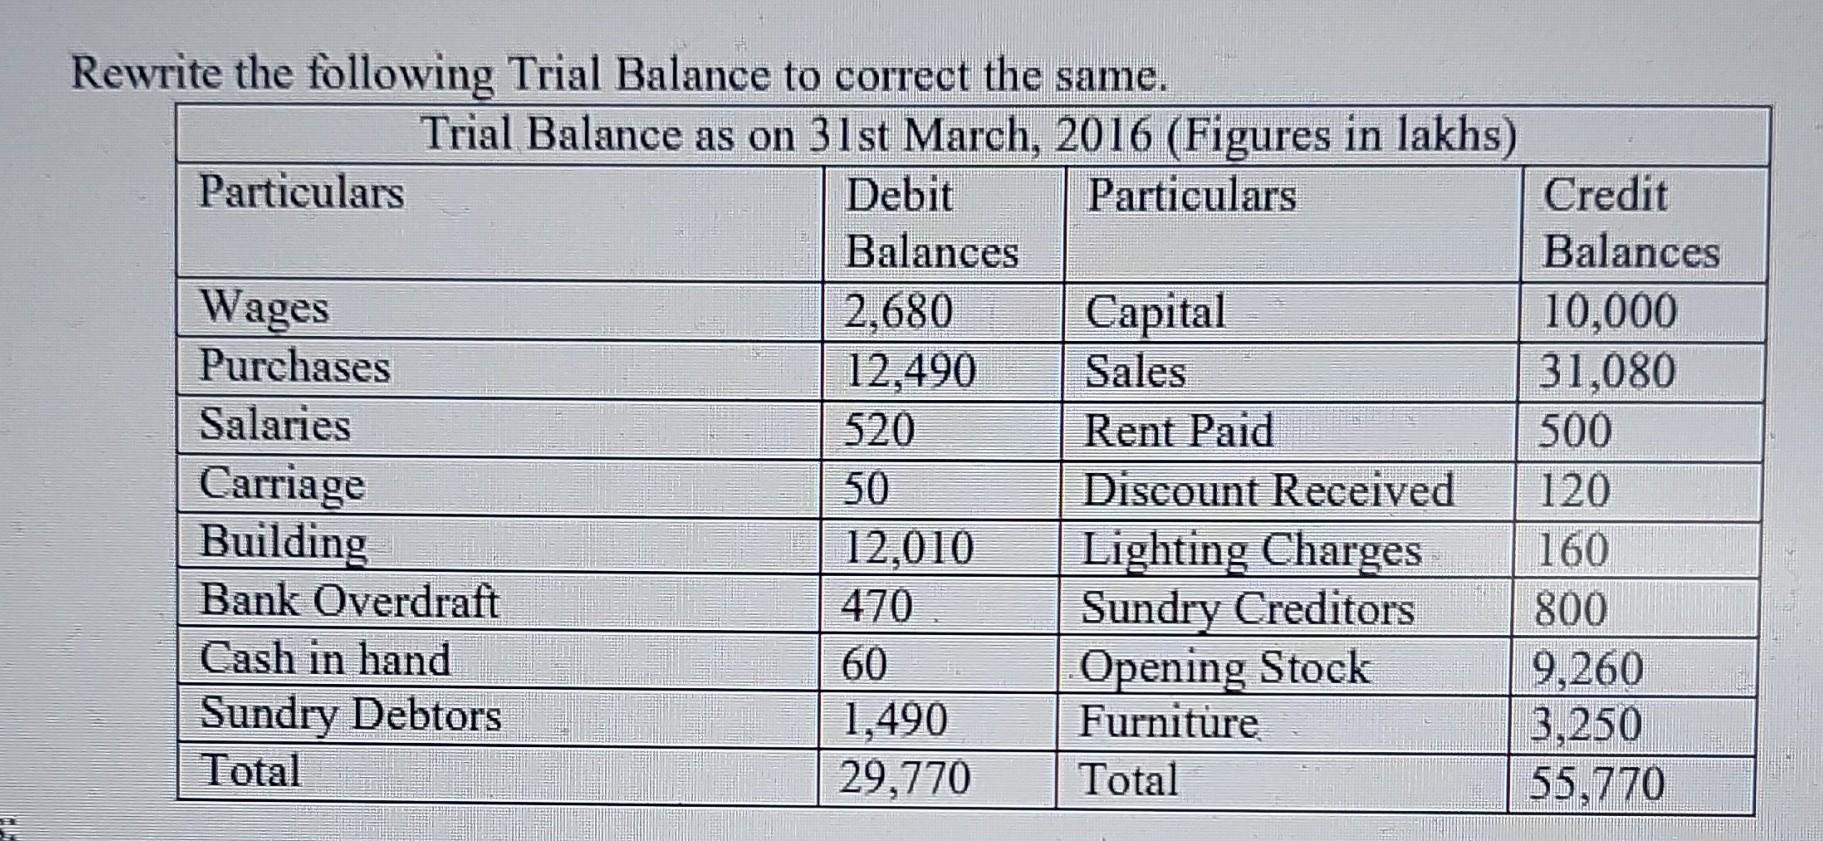 Rewrite the following Trial Balance to correct the same.Trial Balance as on 31st March, 2016 (Figures in lakhs)Particulars